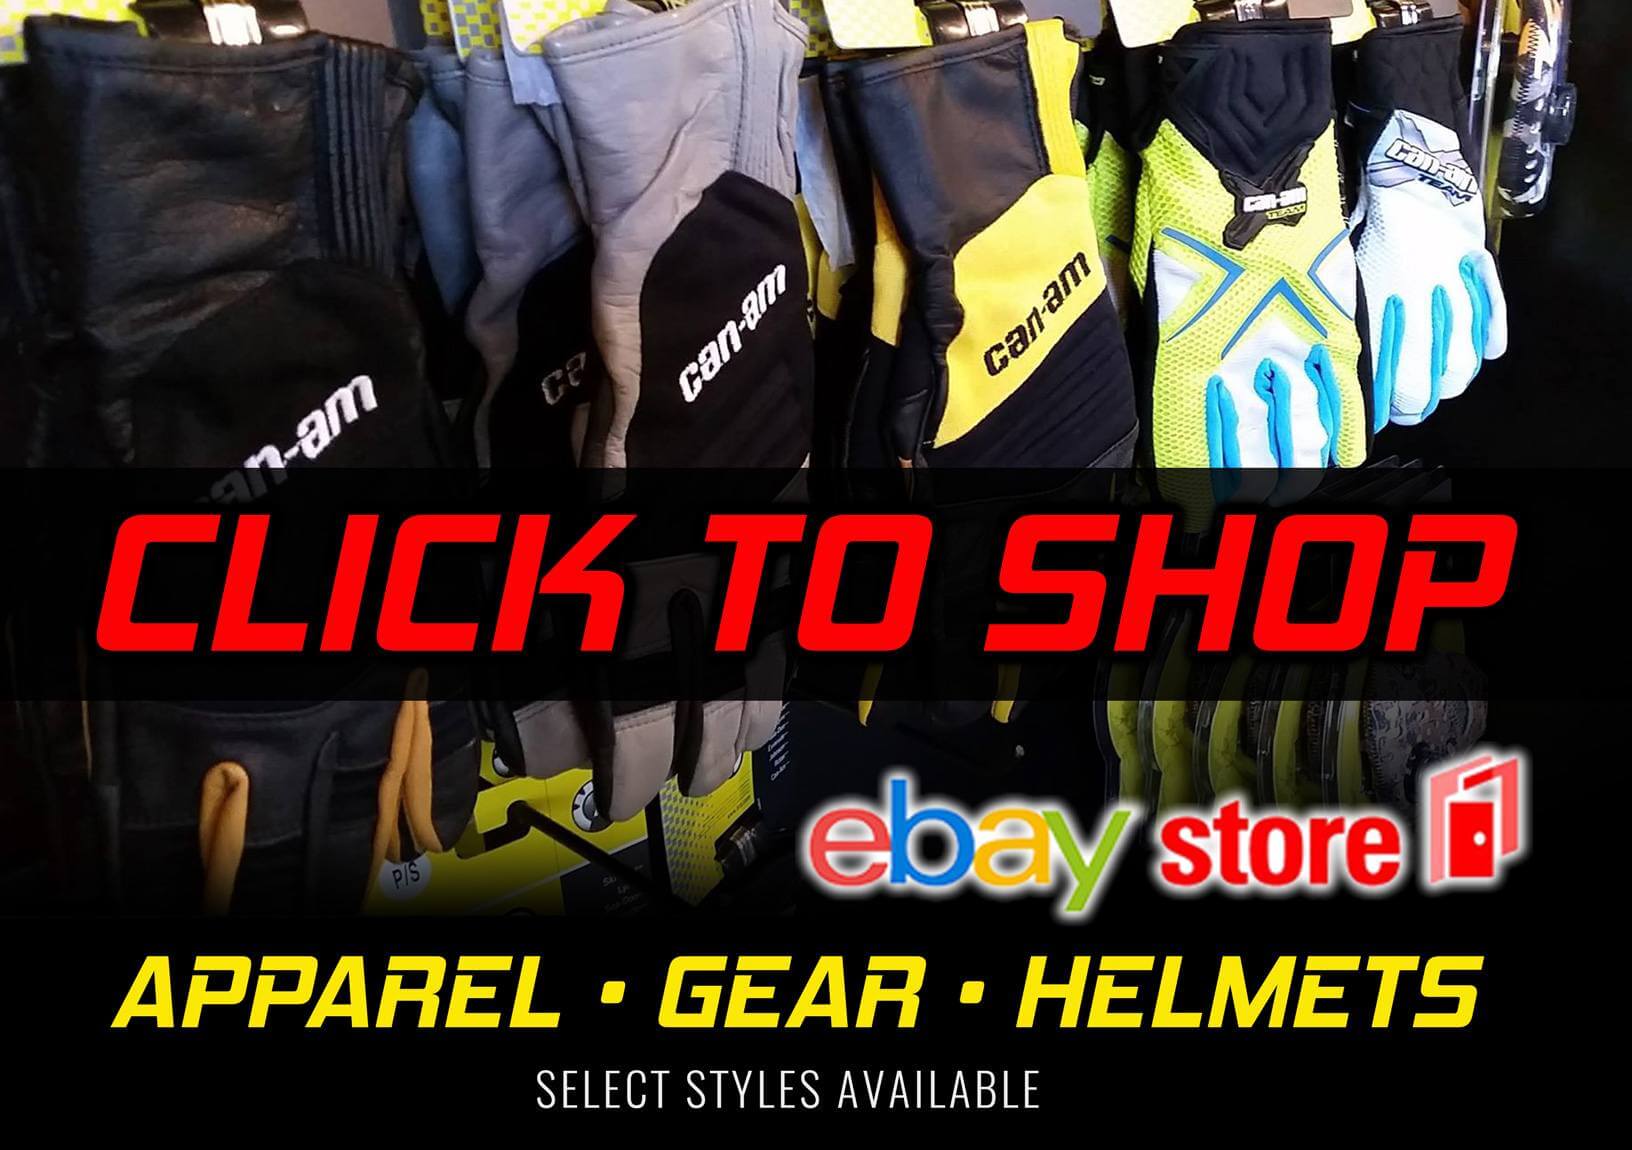 Click to Shop - Can-Am, Sea-Doo, Ski-Doo, Quad Boss eBay store - Apparel, Gear, Helmets - Select Styles Available